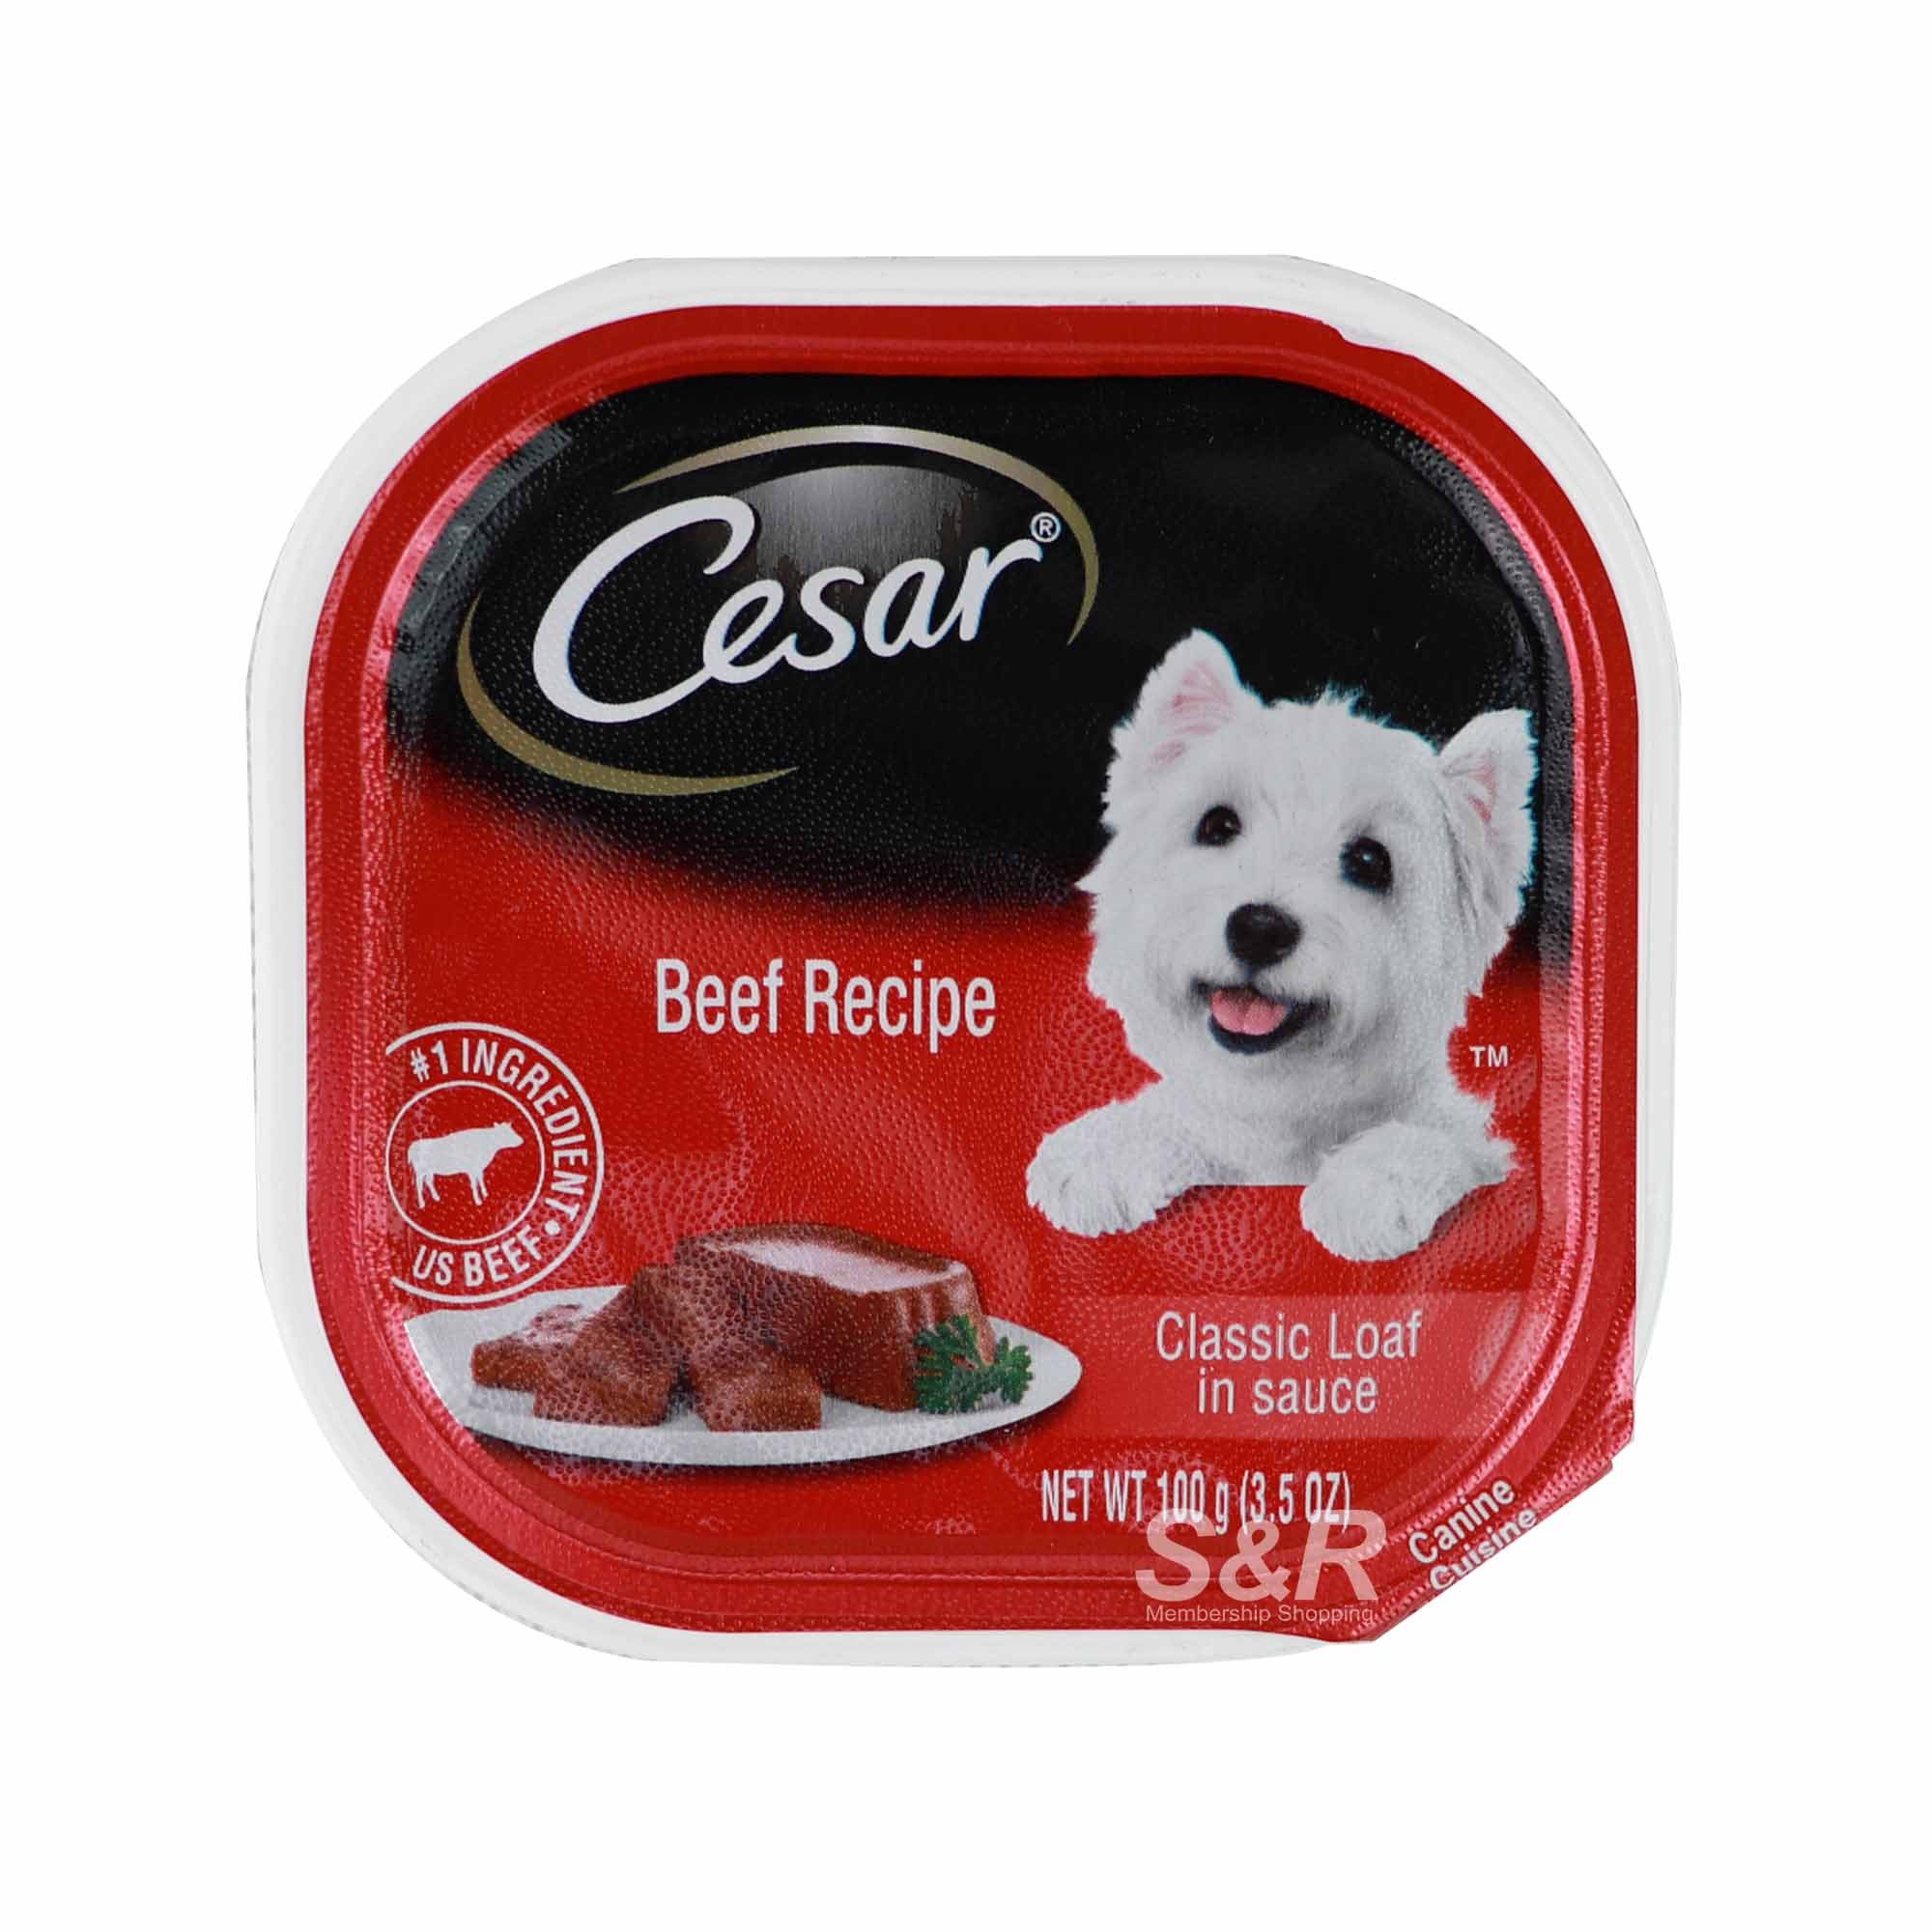 Cesar Classic Loaf in Sauce Wet Dog Food 100g